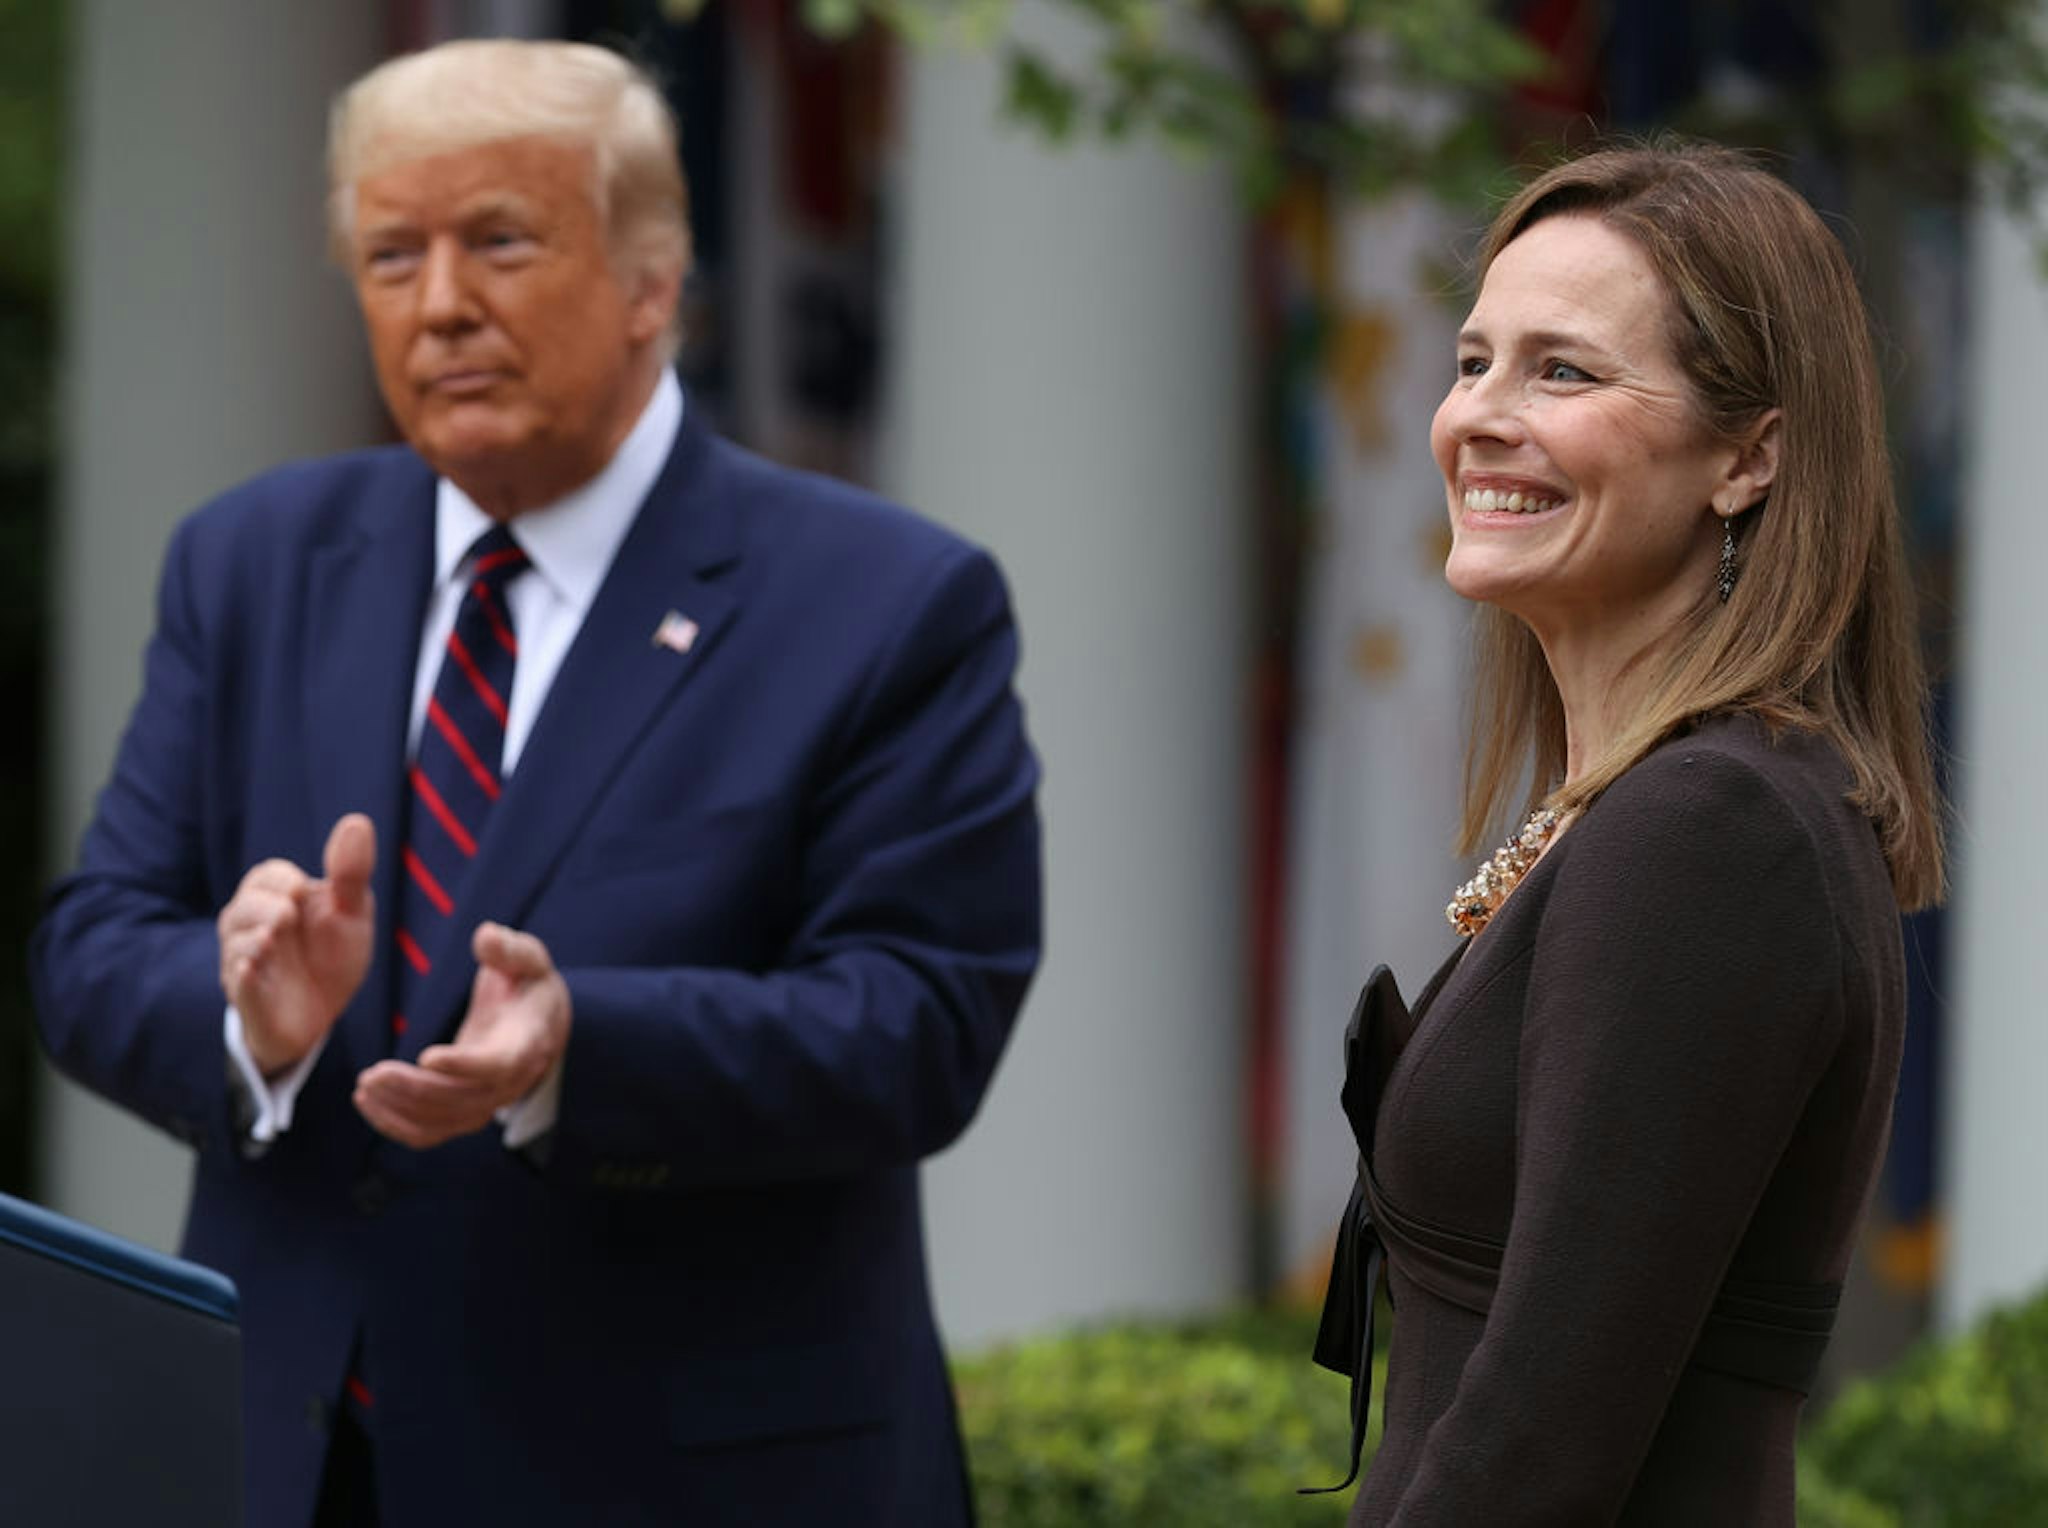 WASHINGTON, DC - SEPTEMBER 26: U.S. President Donald Trump (L) introduces 7th U.S. Circuit Court Judge Amy Coney Barrett as his nominee to the Supreme Court in the Rose Garden at the White House September 26, 2020 in Washington, DC. With 38 days until the election, Trump tapped Barrett to be his third Supreme Court nominee in just four years and to replace the late Associate Justice Ruth Bader Ginsburg, who will be buried at Arlington National Cemetery on Tuesday. (Photo by Chip Somodevilla/Getty Images) and authorities at his disposal, to aid U.S. farmers, whose financial peril has worsened in the coronavirus pandemic. Photographer: